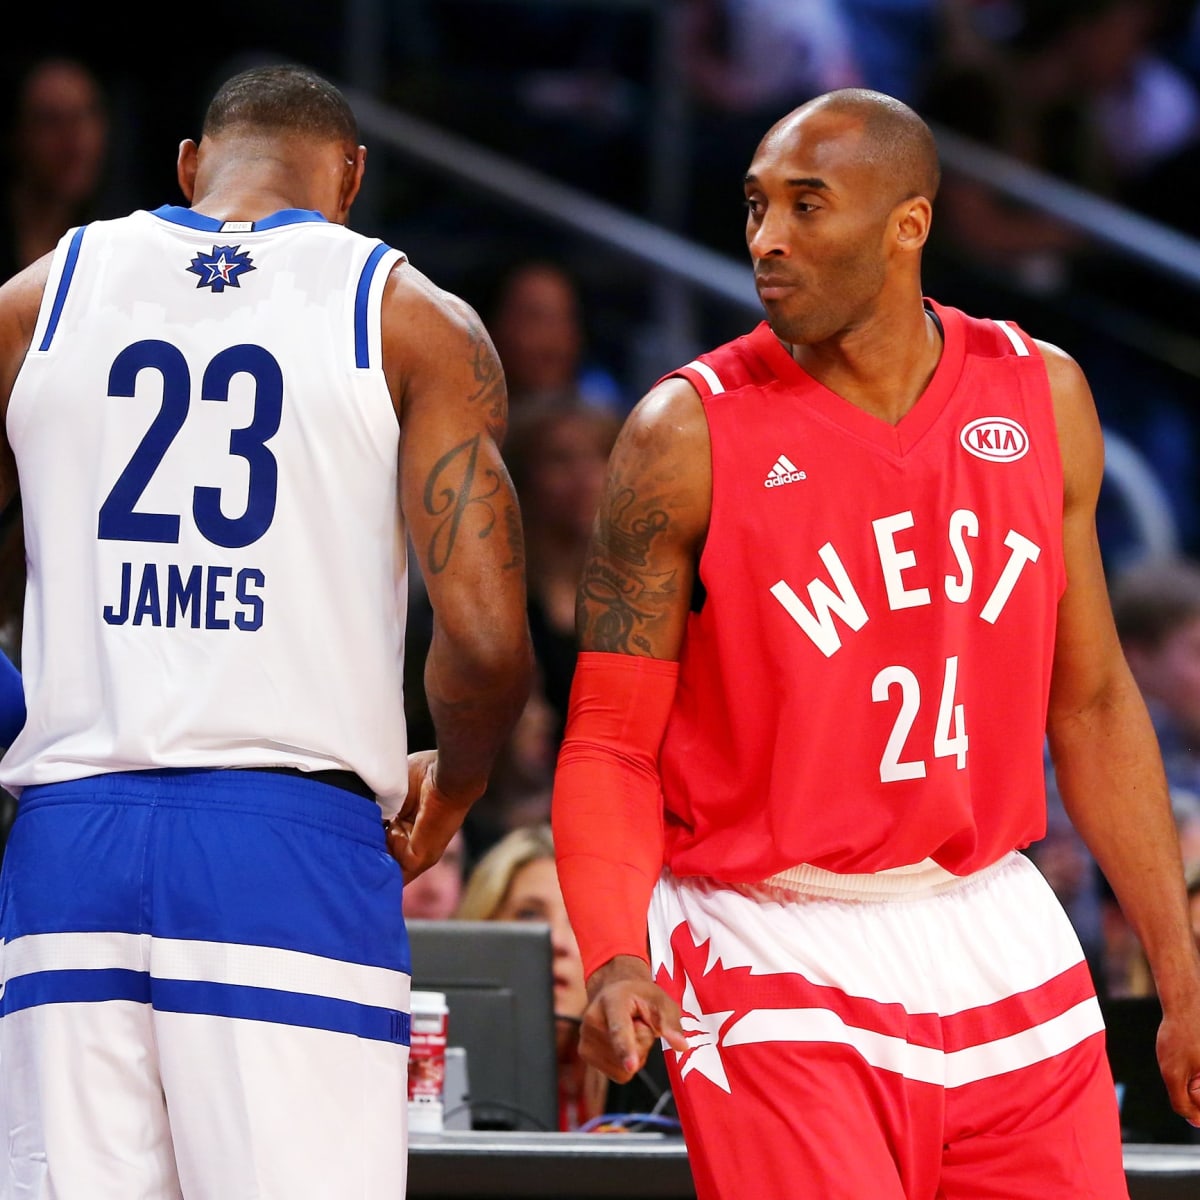 The NBA is going to put ads on jerseys, and life as we know it is over